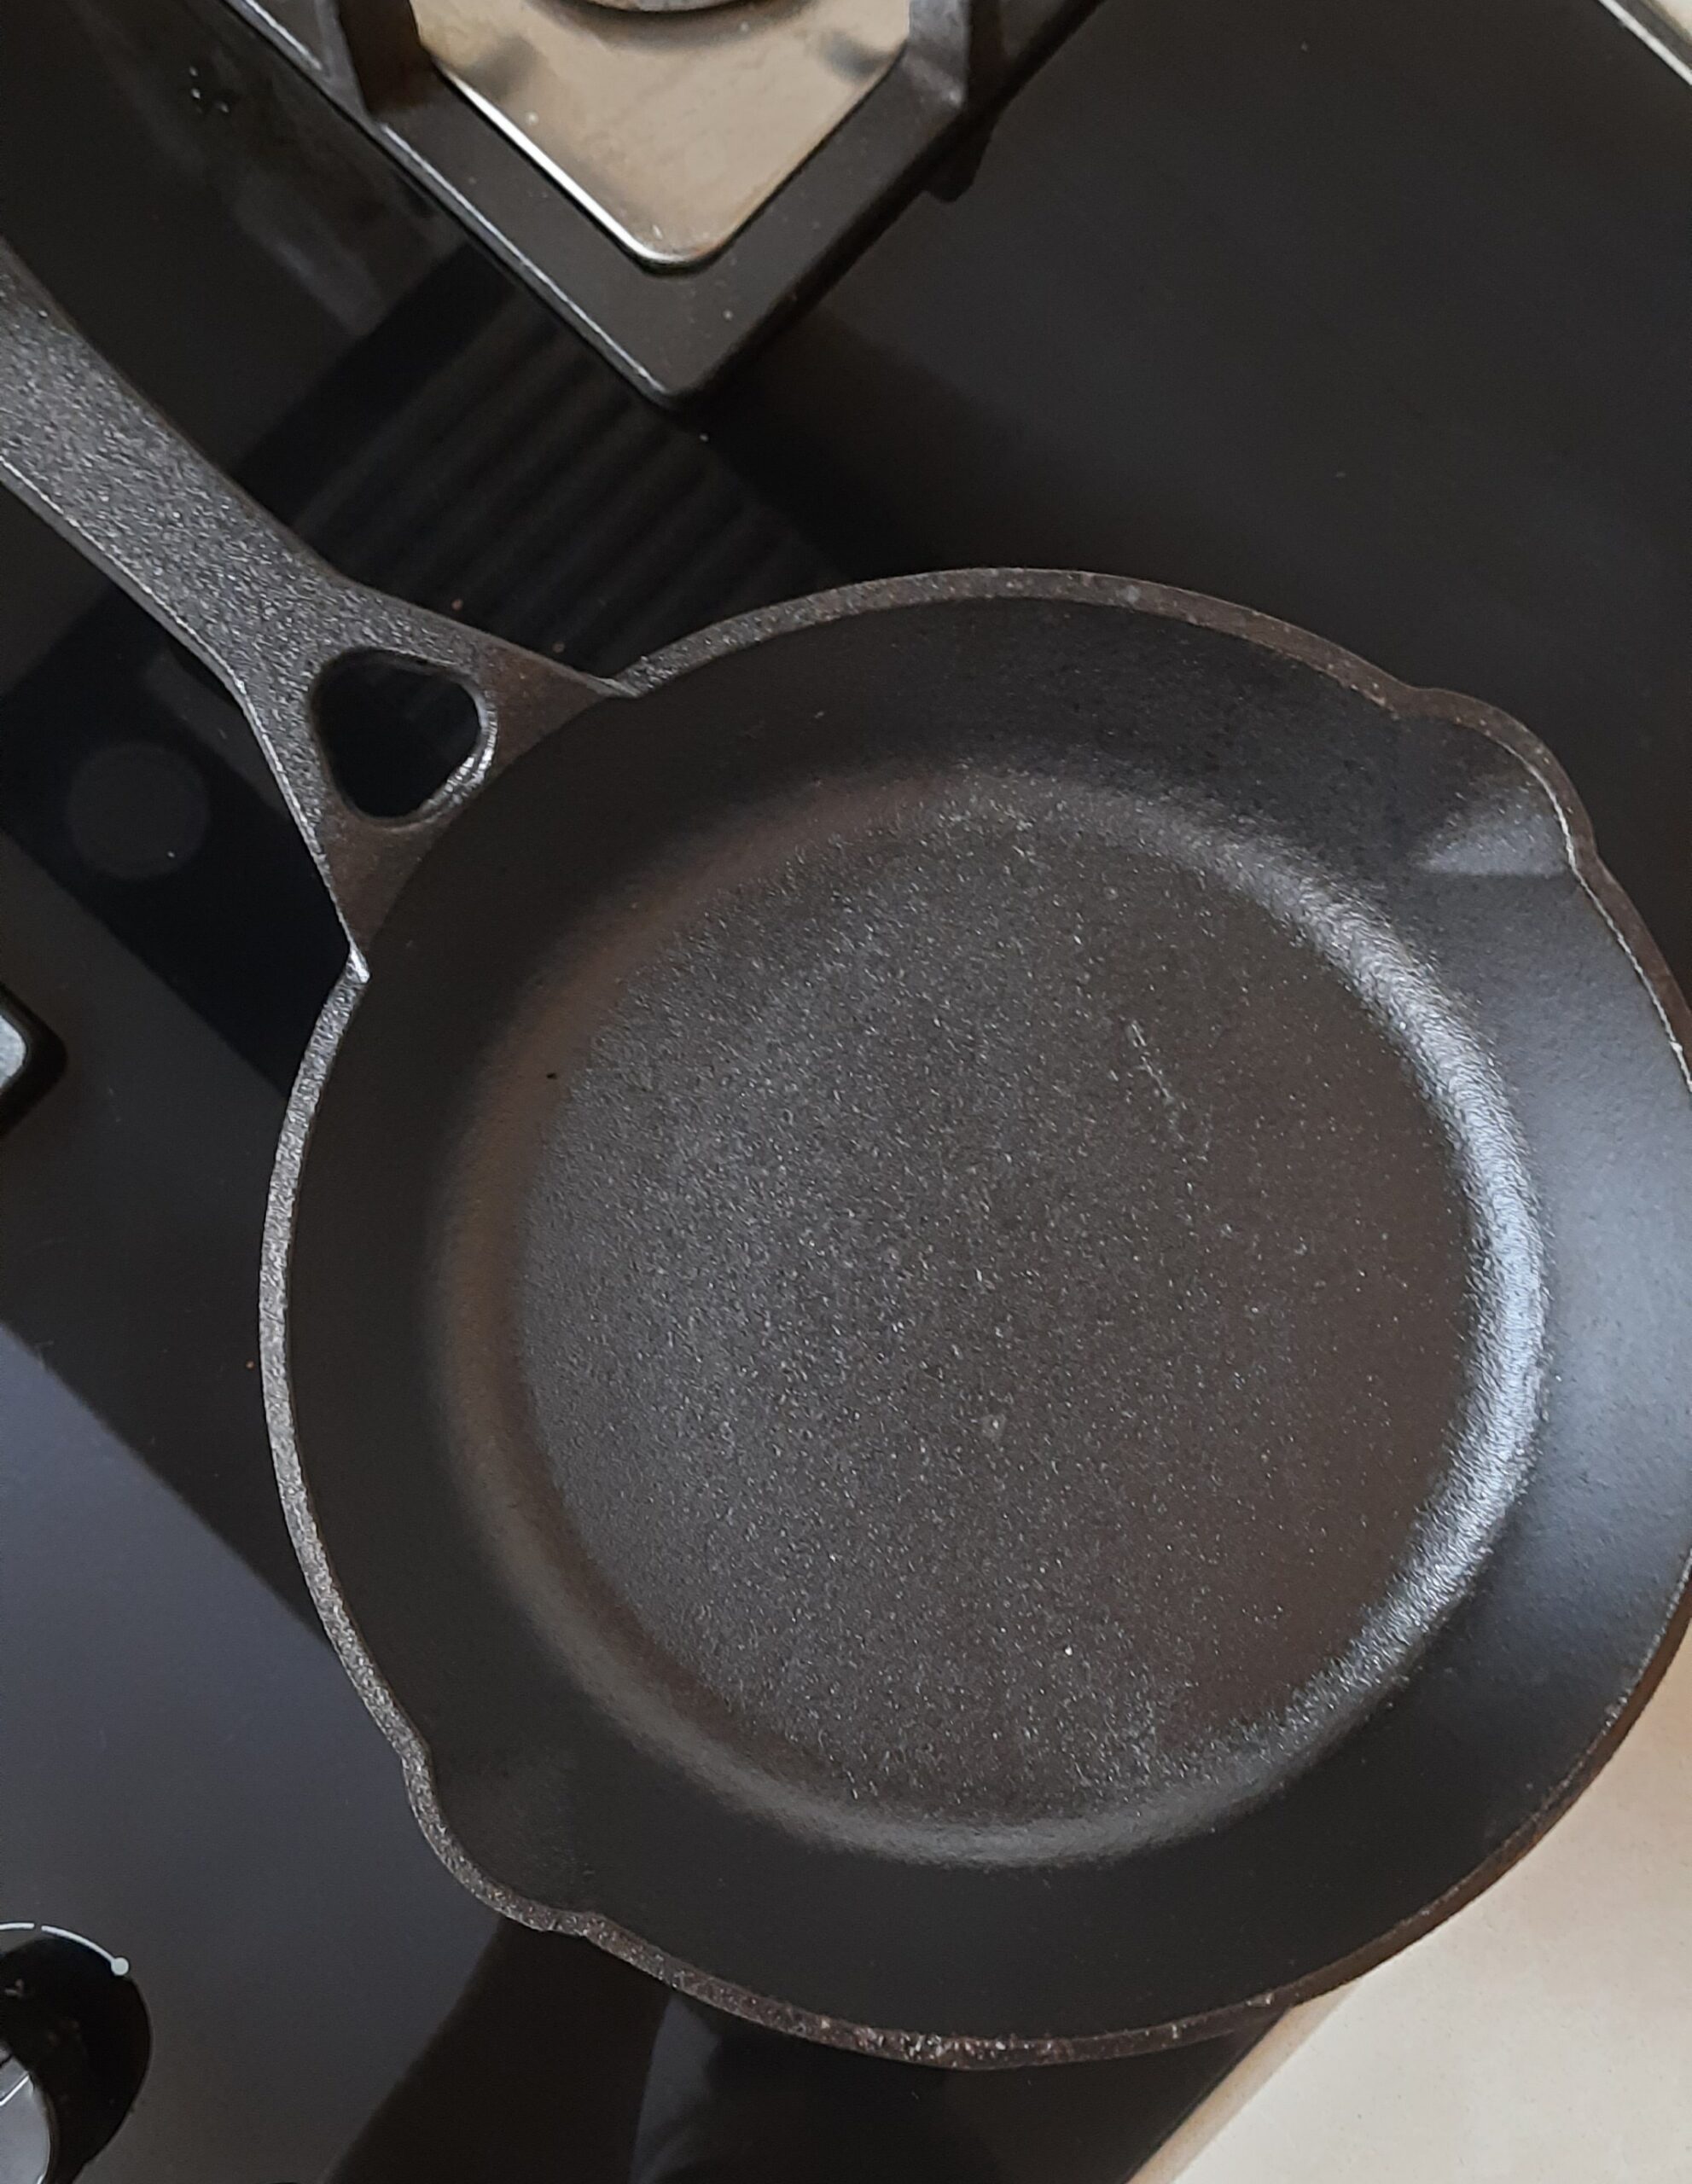 Product Review: The Indus Valley Cast Iron Frypan / Skillet